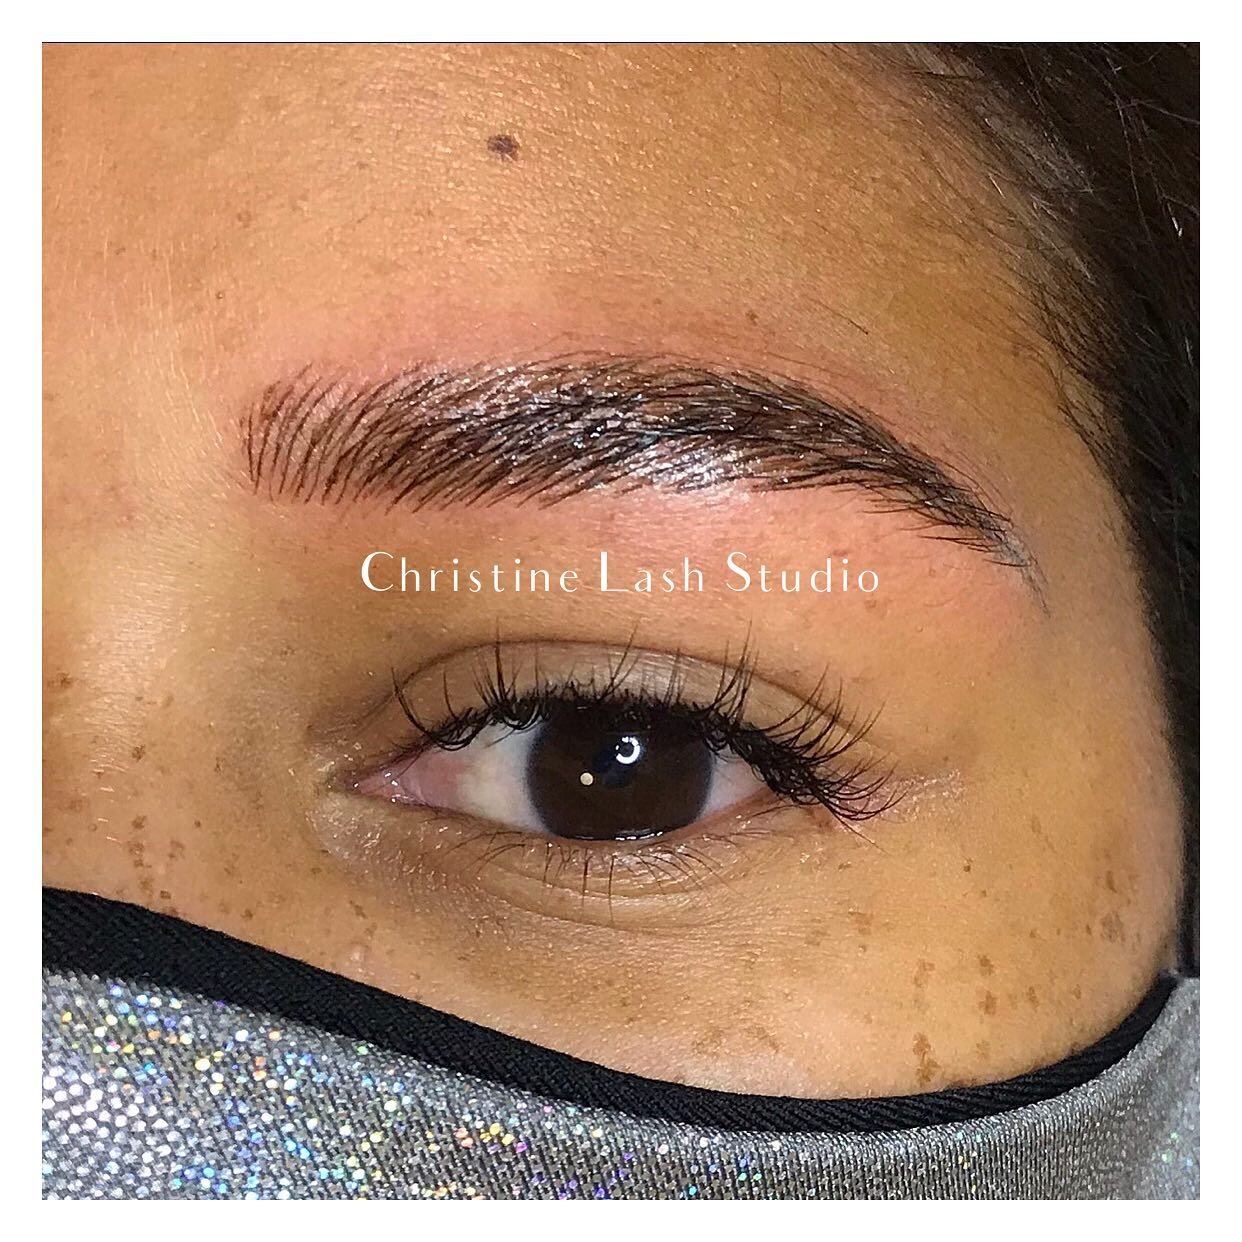 Classic Microblading created by drawing thin, hair like strokes to mimic the look of natural brow hairs. Would you try Microblading? 
#microblading #brows #browtransformation #browsonpoint #fullbrows #naturalbrows #beforeandafter